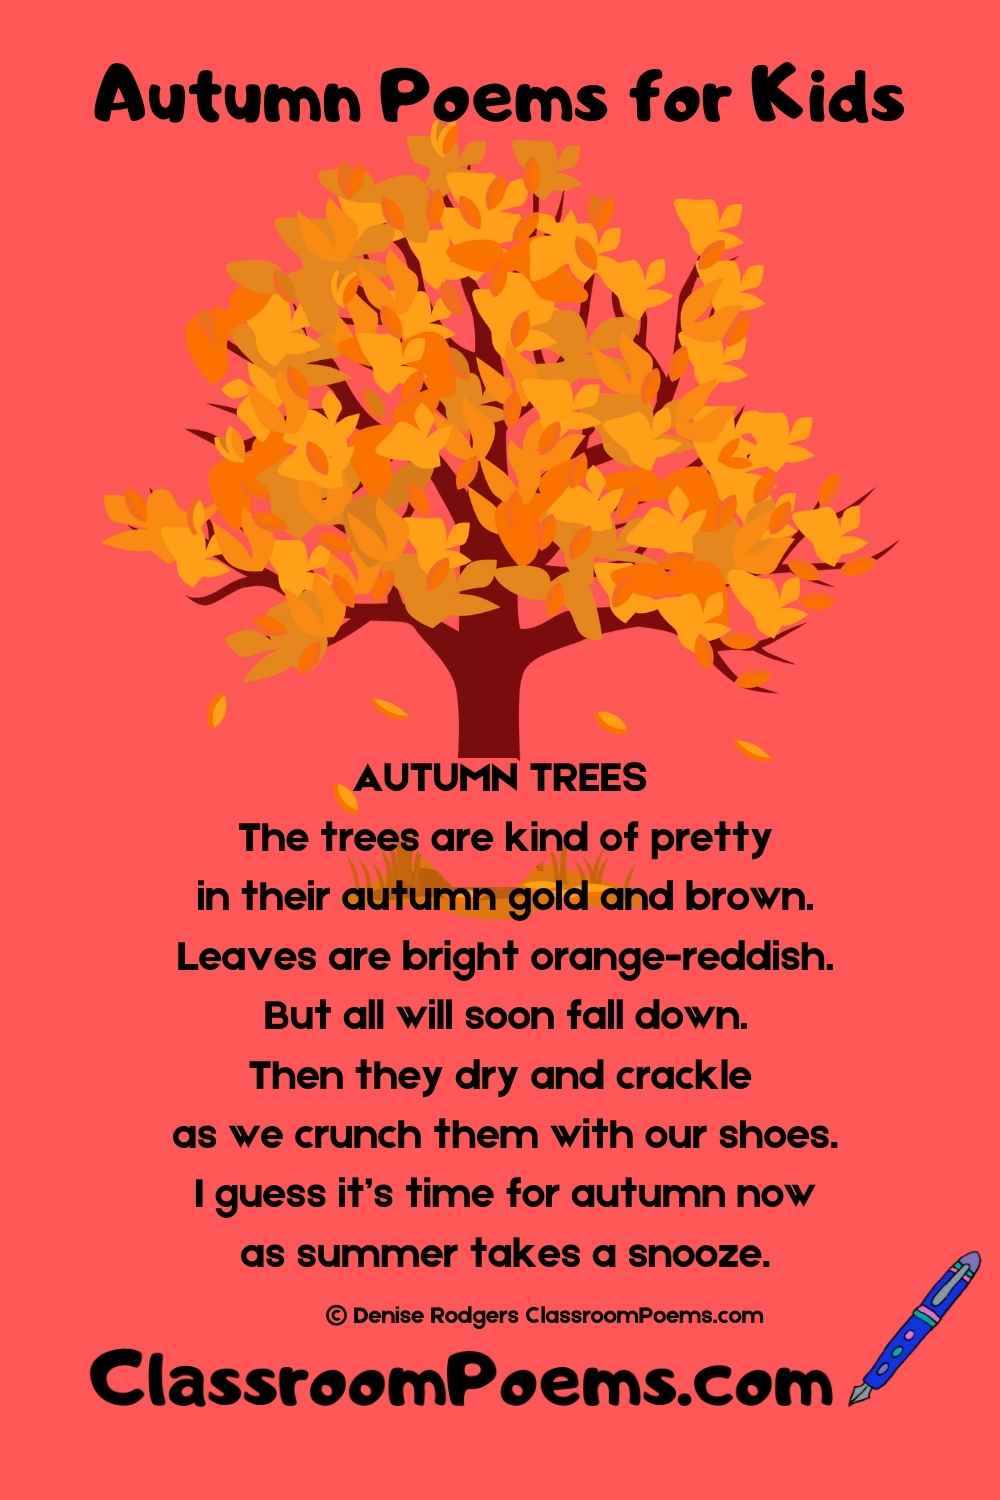 A poem about autumn trees by Denise Rodgers on ClassroomPoems.com.